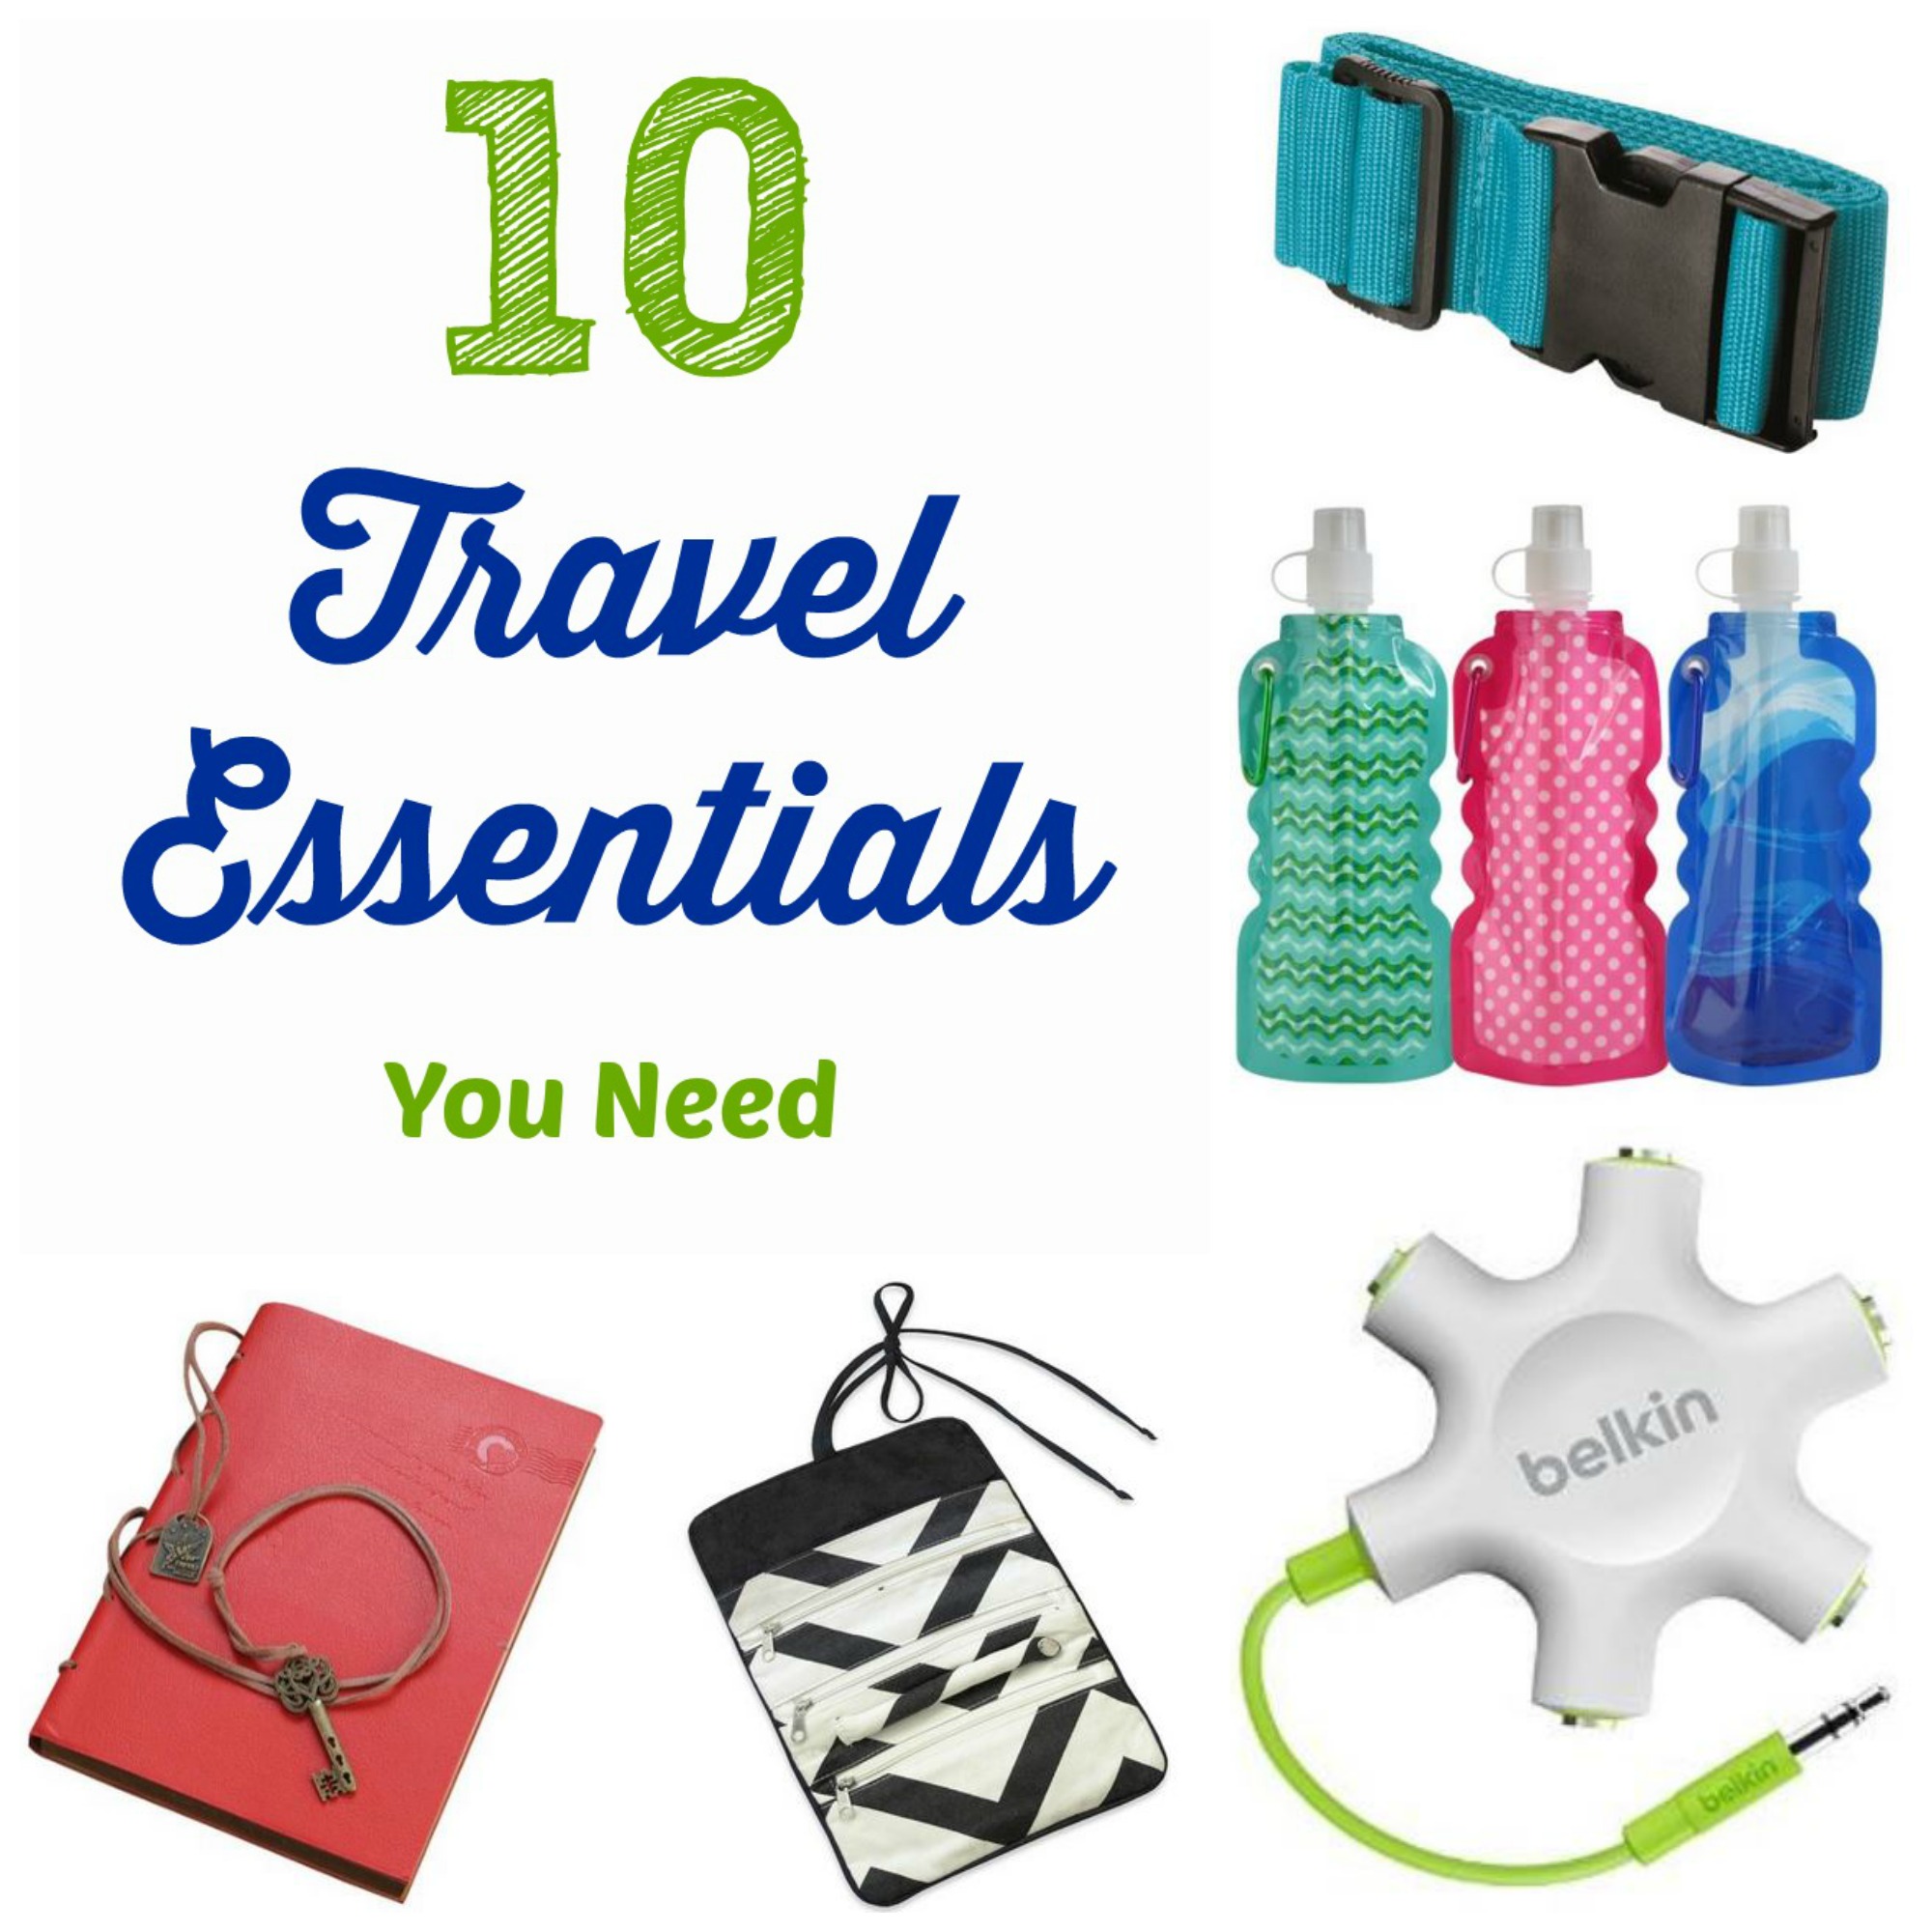 Travel Essentials. Travel items ответы. Saturalia Holiday Pack. Things you can Pack for Holidays.